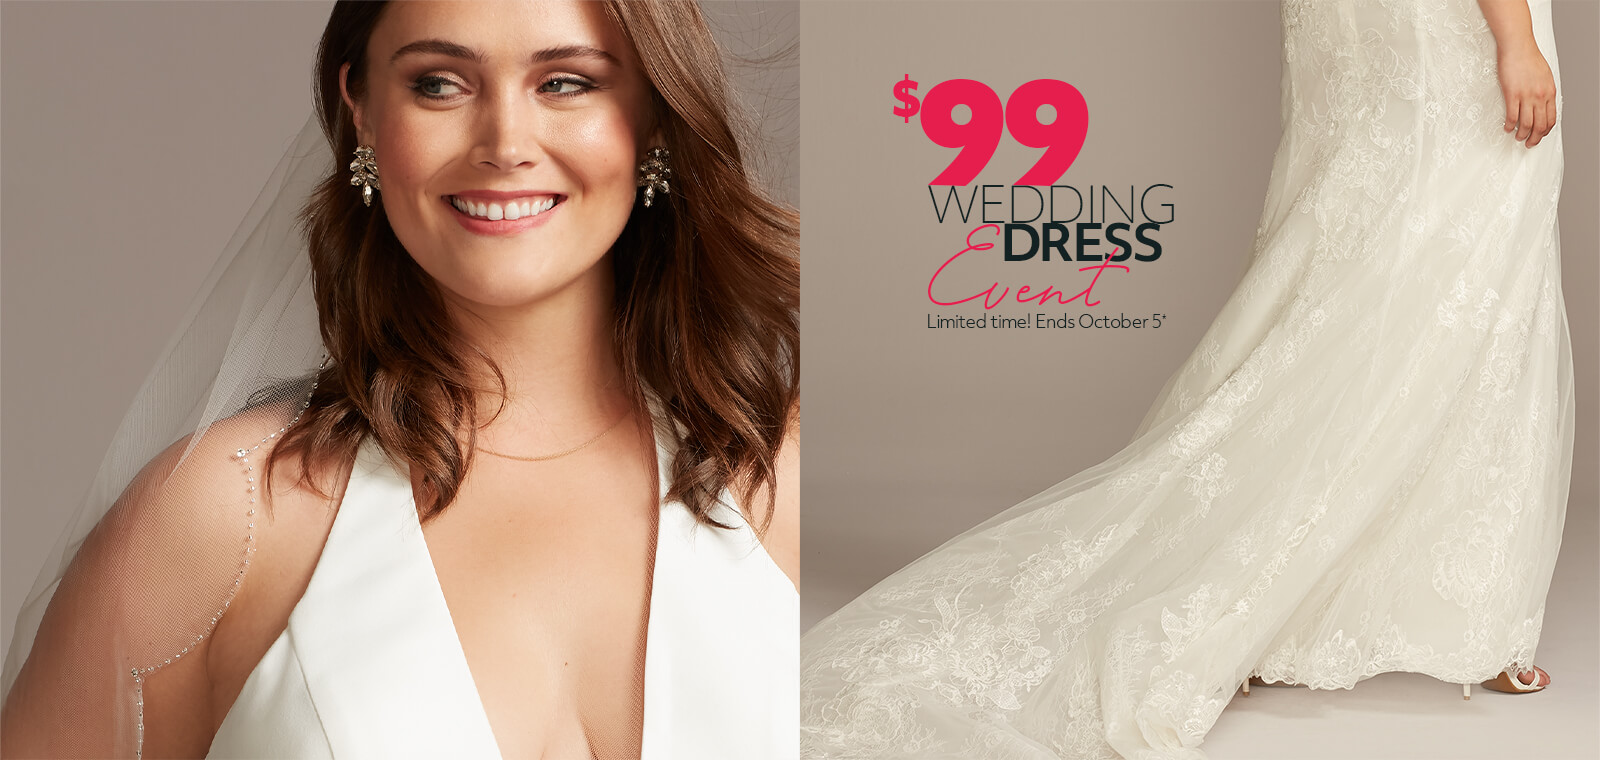 fall for our newest styles with up to $150 off wedding dresses